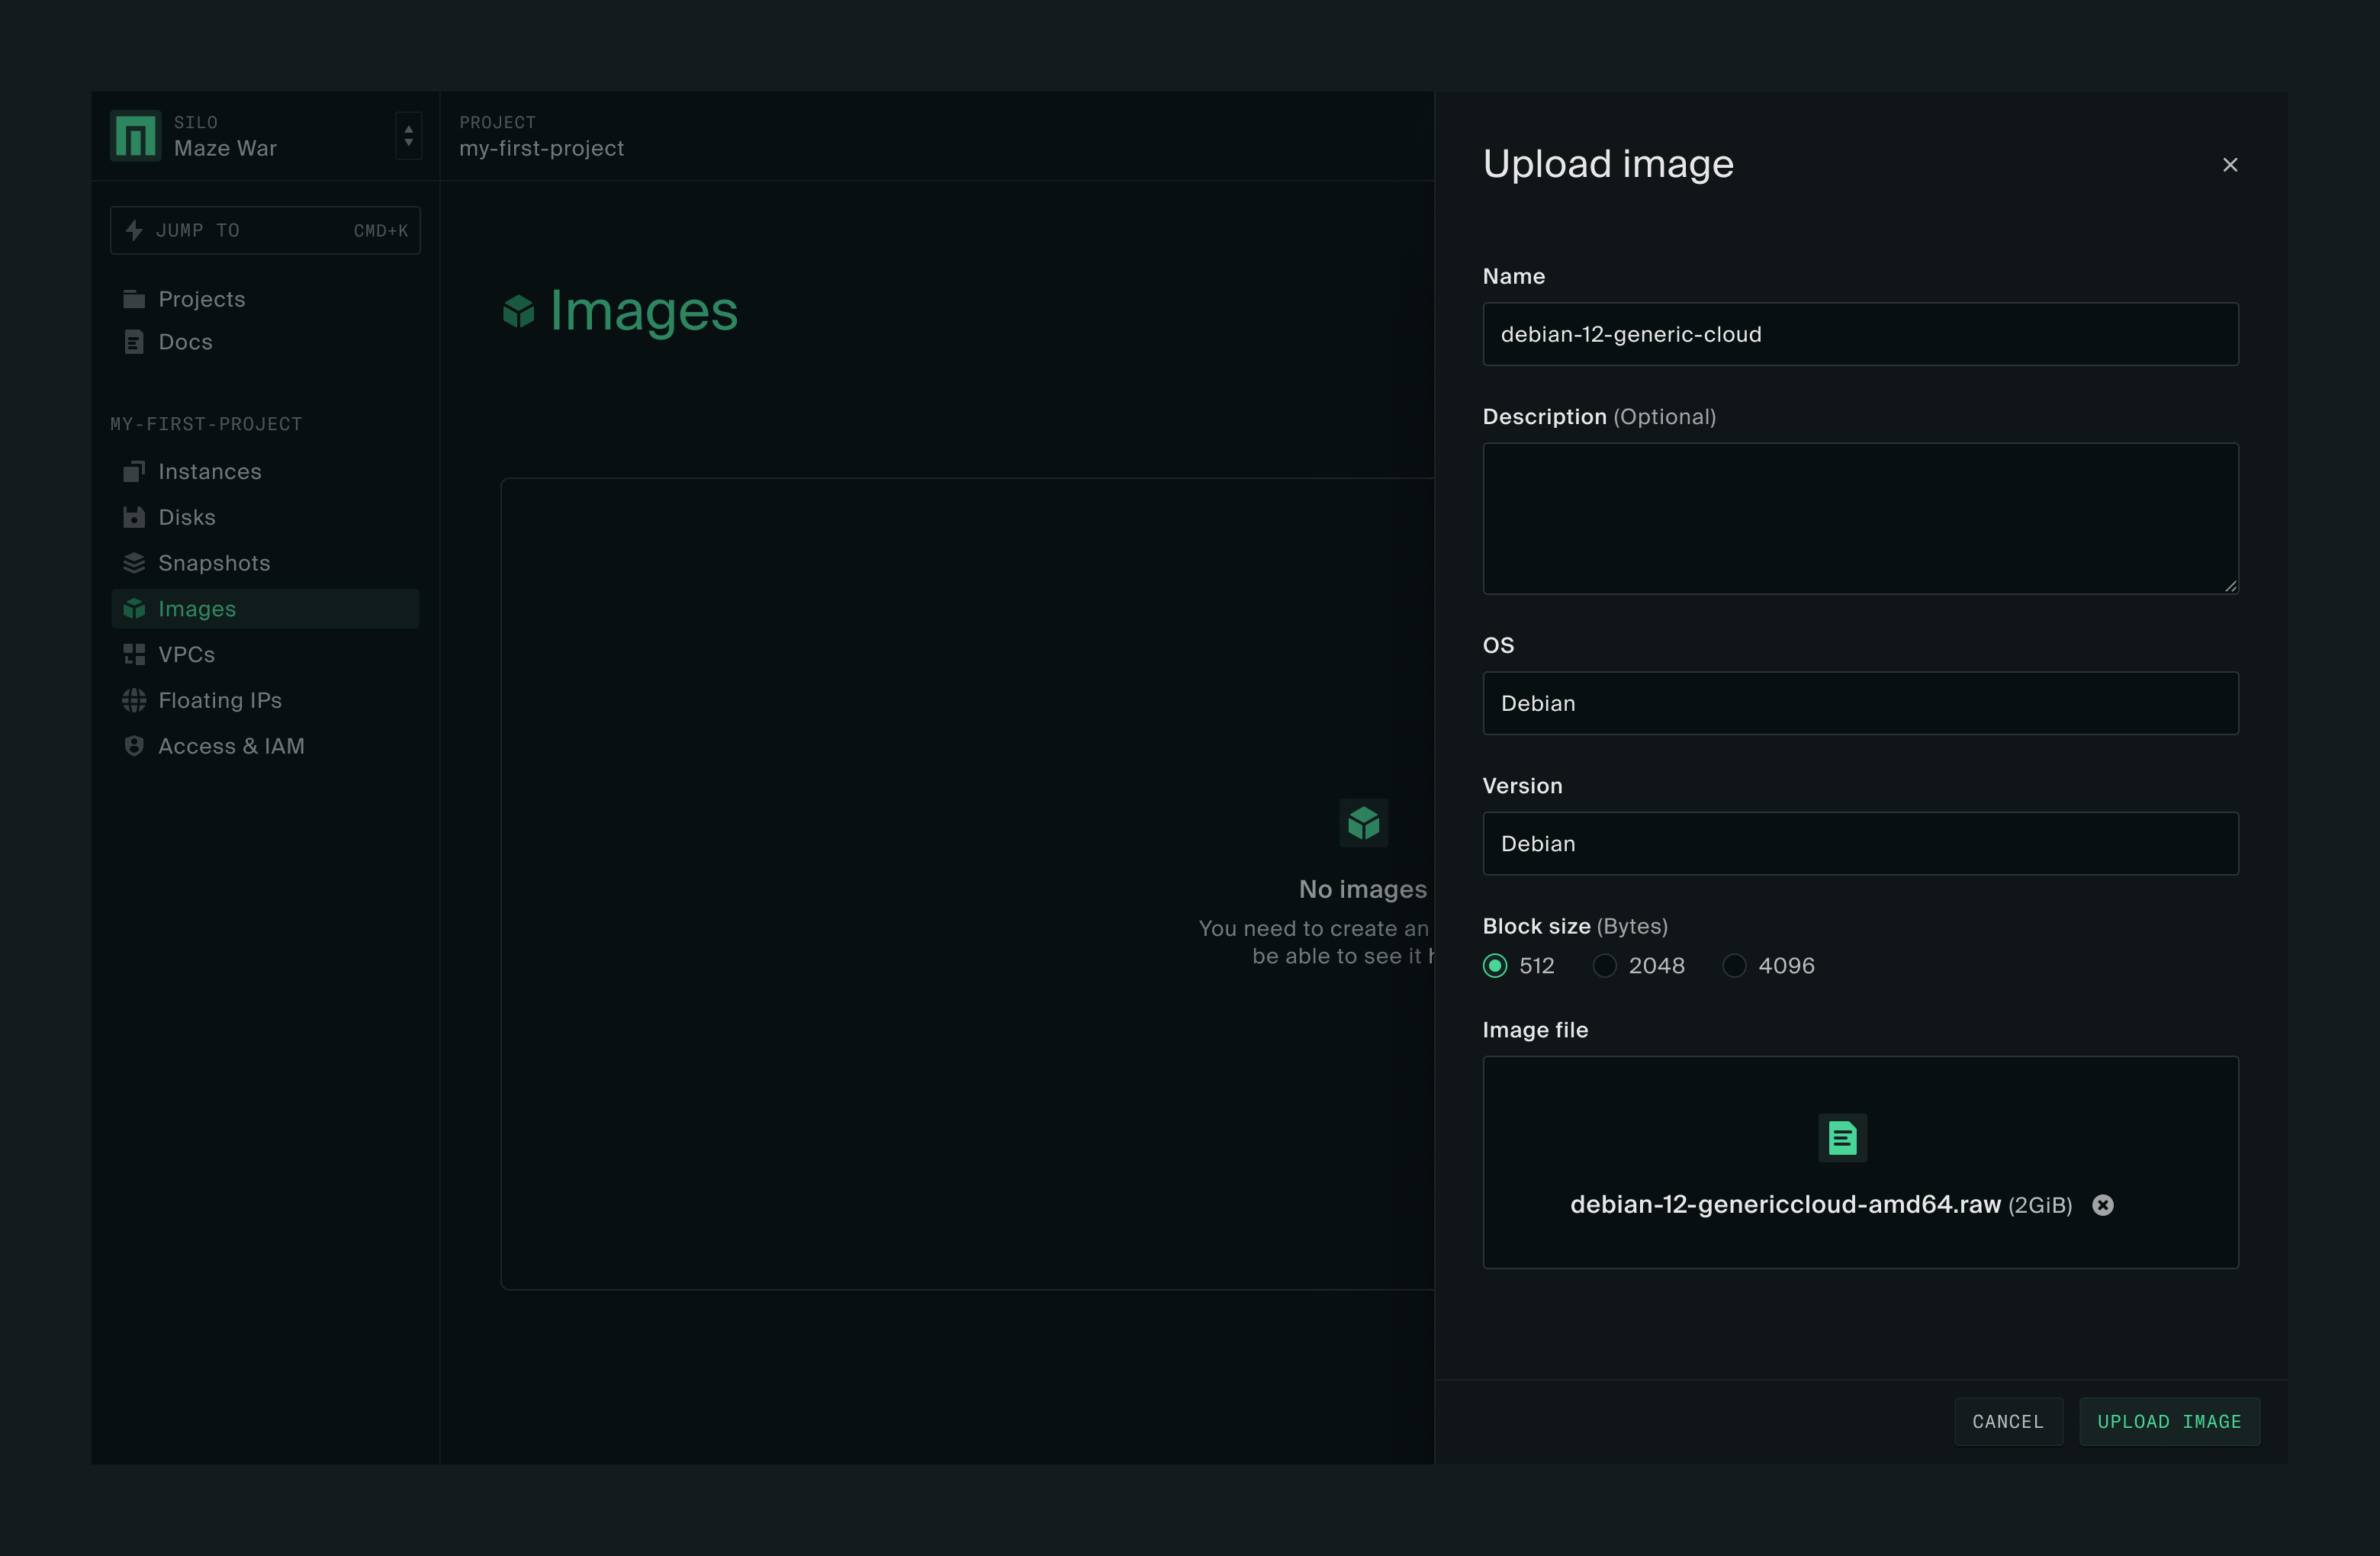 Modal form with inputs to upload and create an image